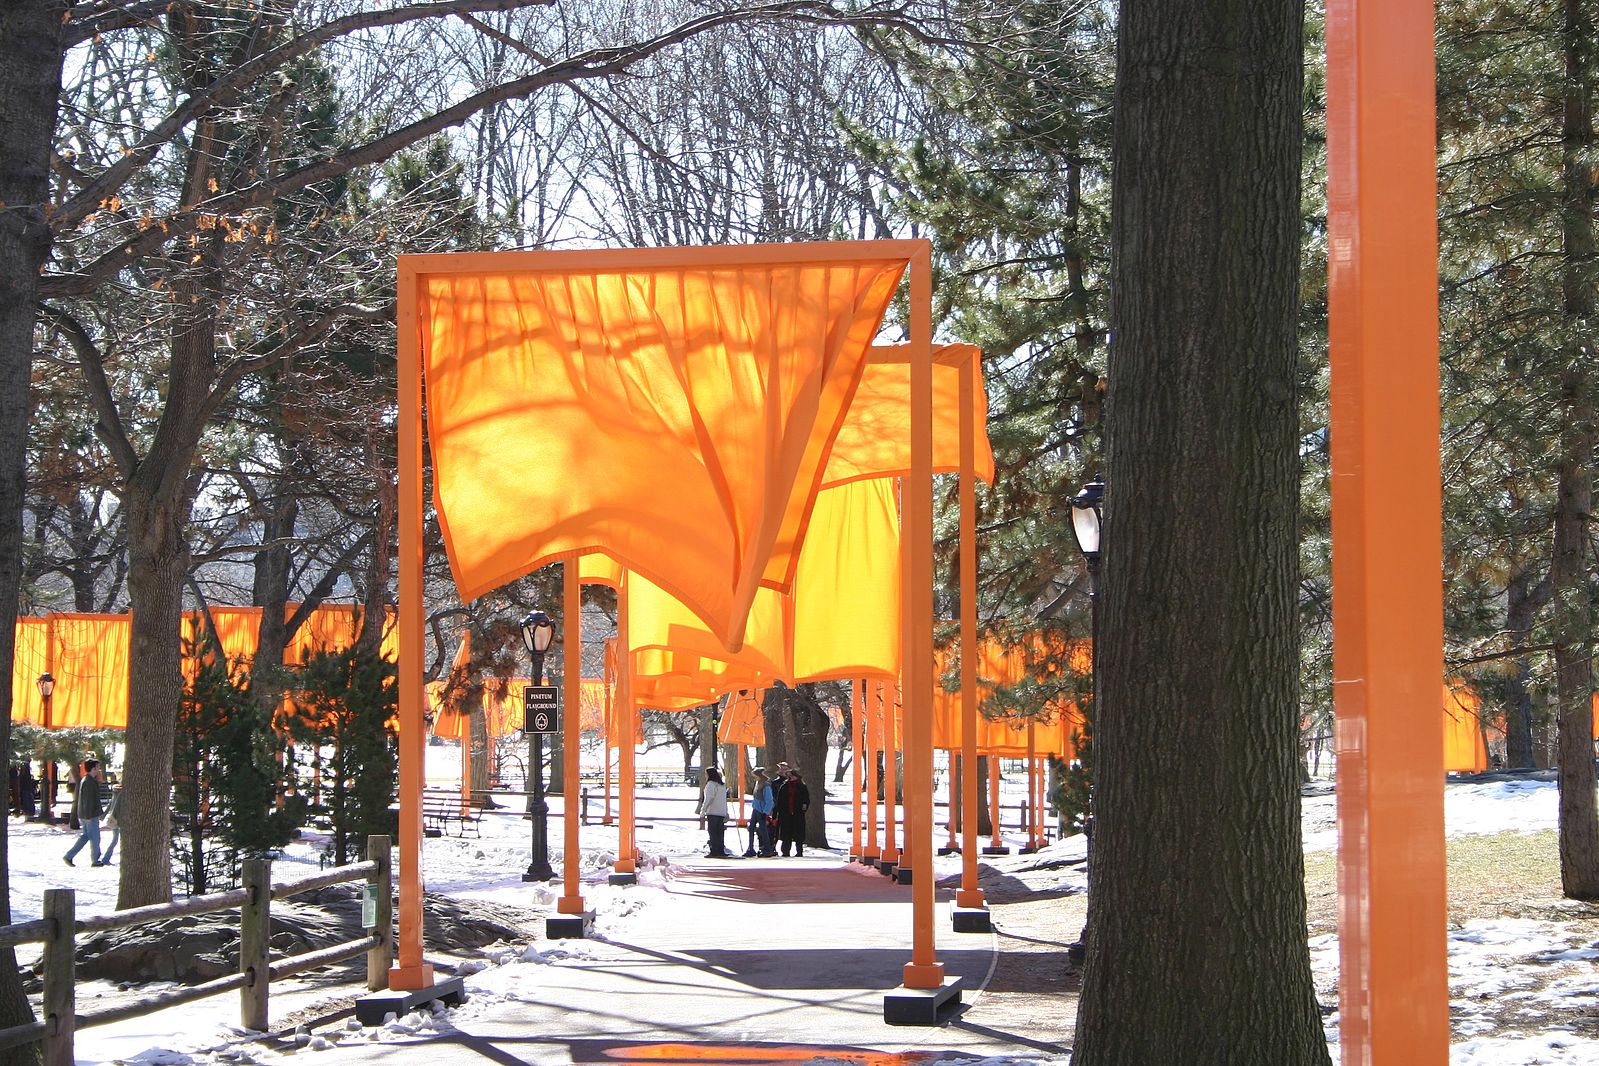 Large orange poles drapped with orange fabric in a tree lined park